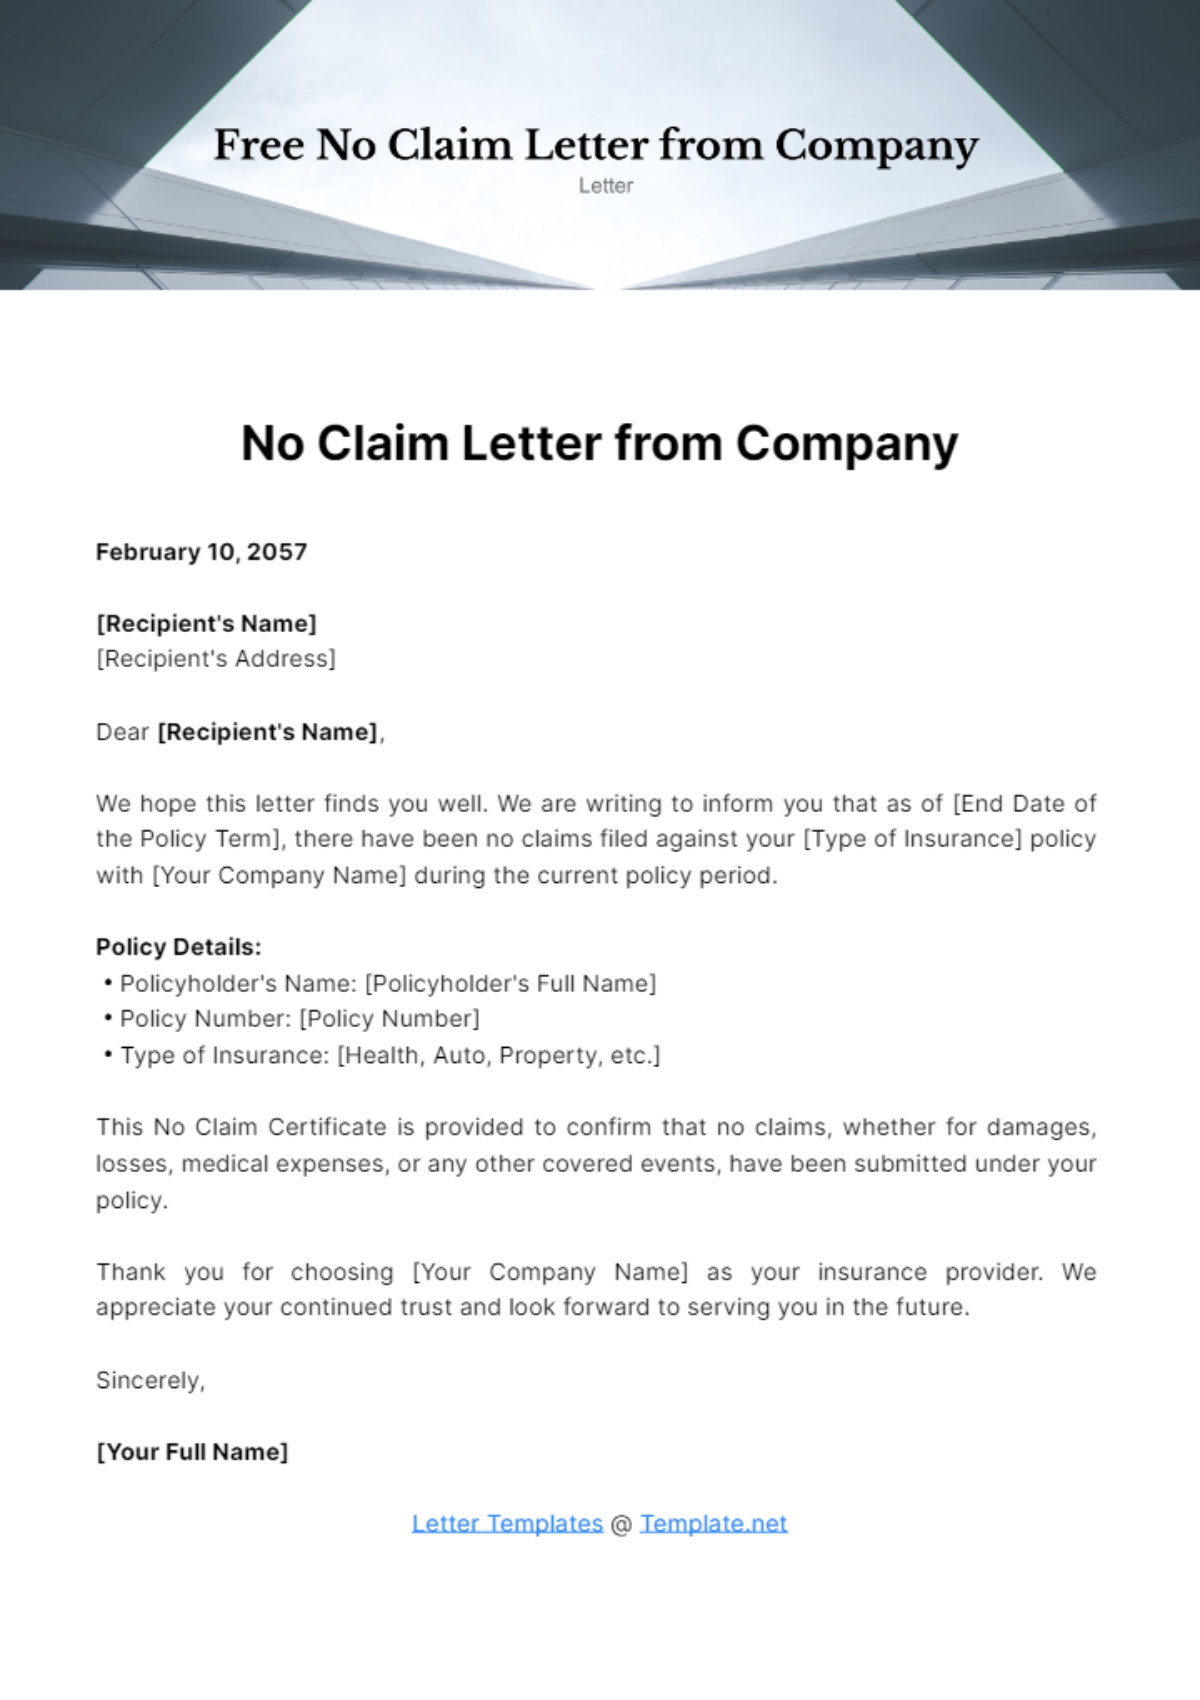 Free No Claim Letter from Company Template